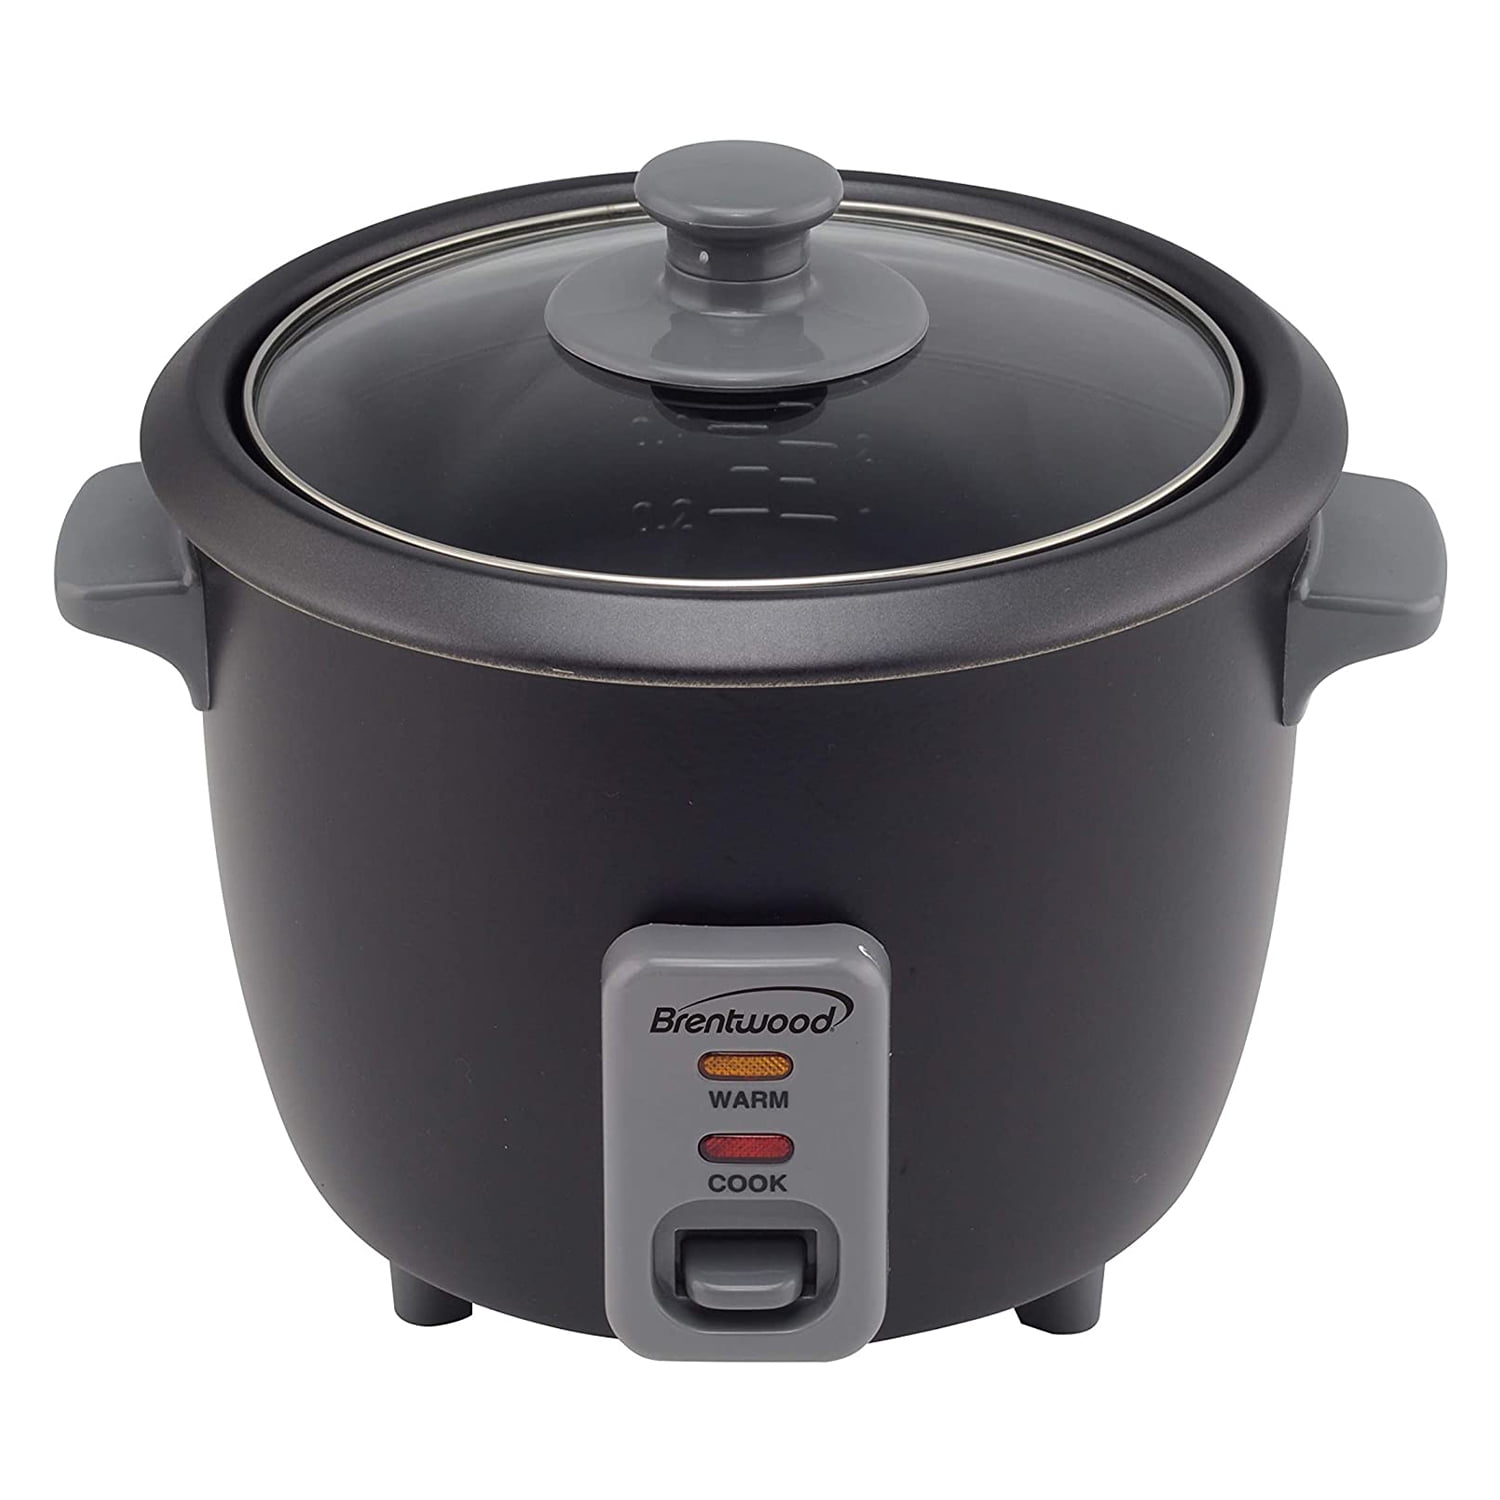 Brentwood TS-700BK 4-Cup Uncooked/8-Cup Rice Cooked Black Cooker Food Steamer, and